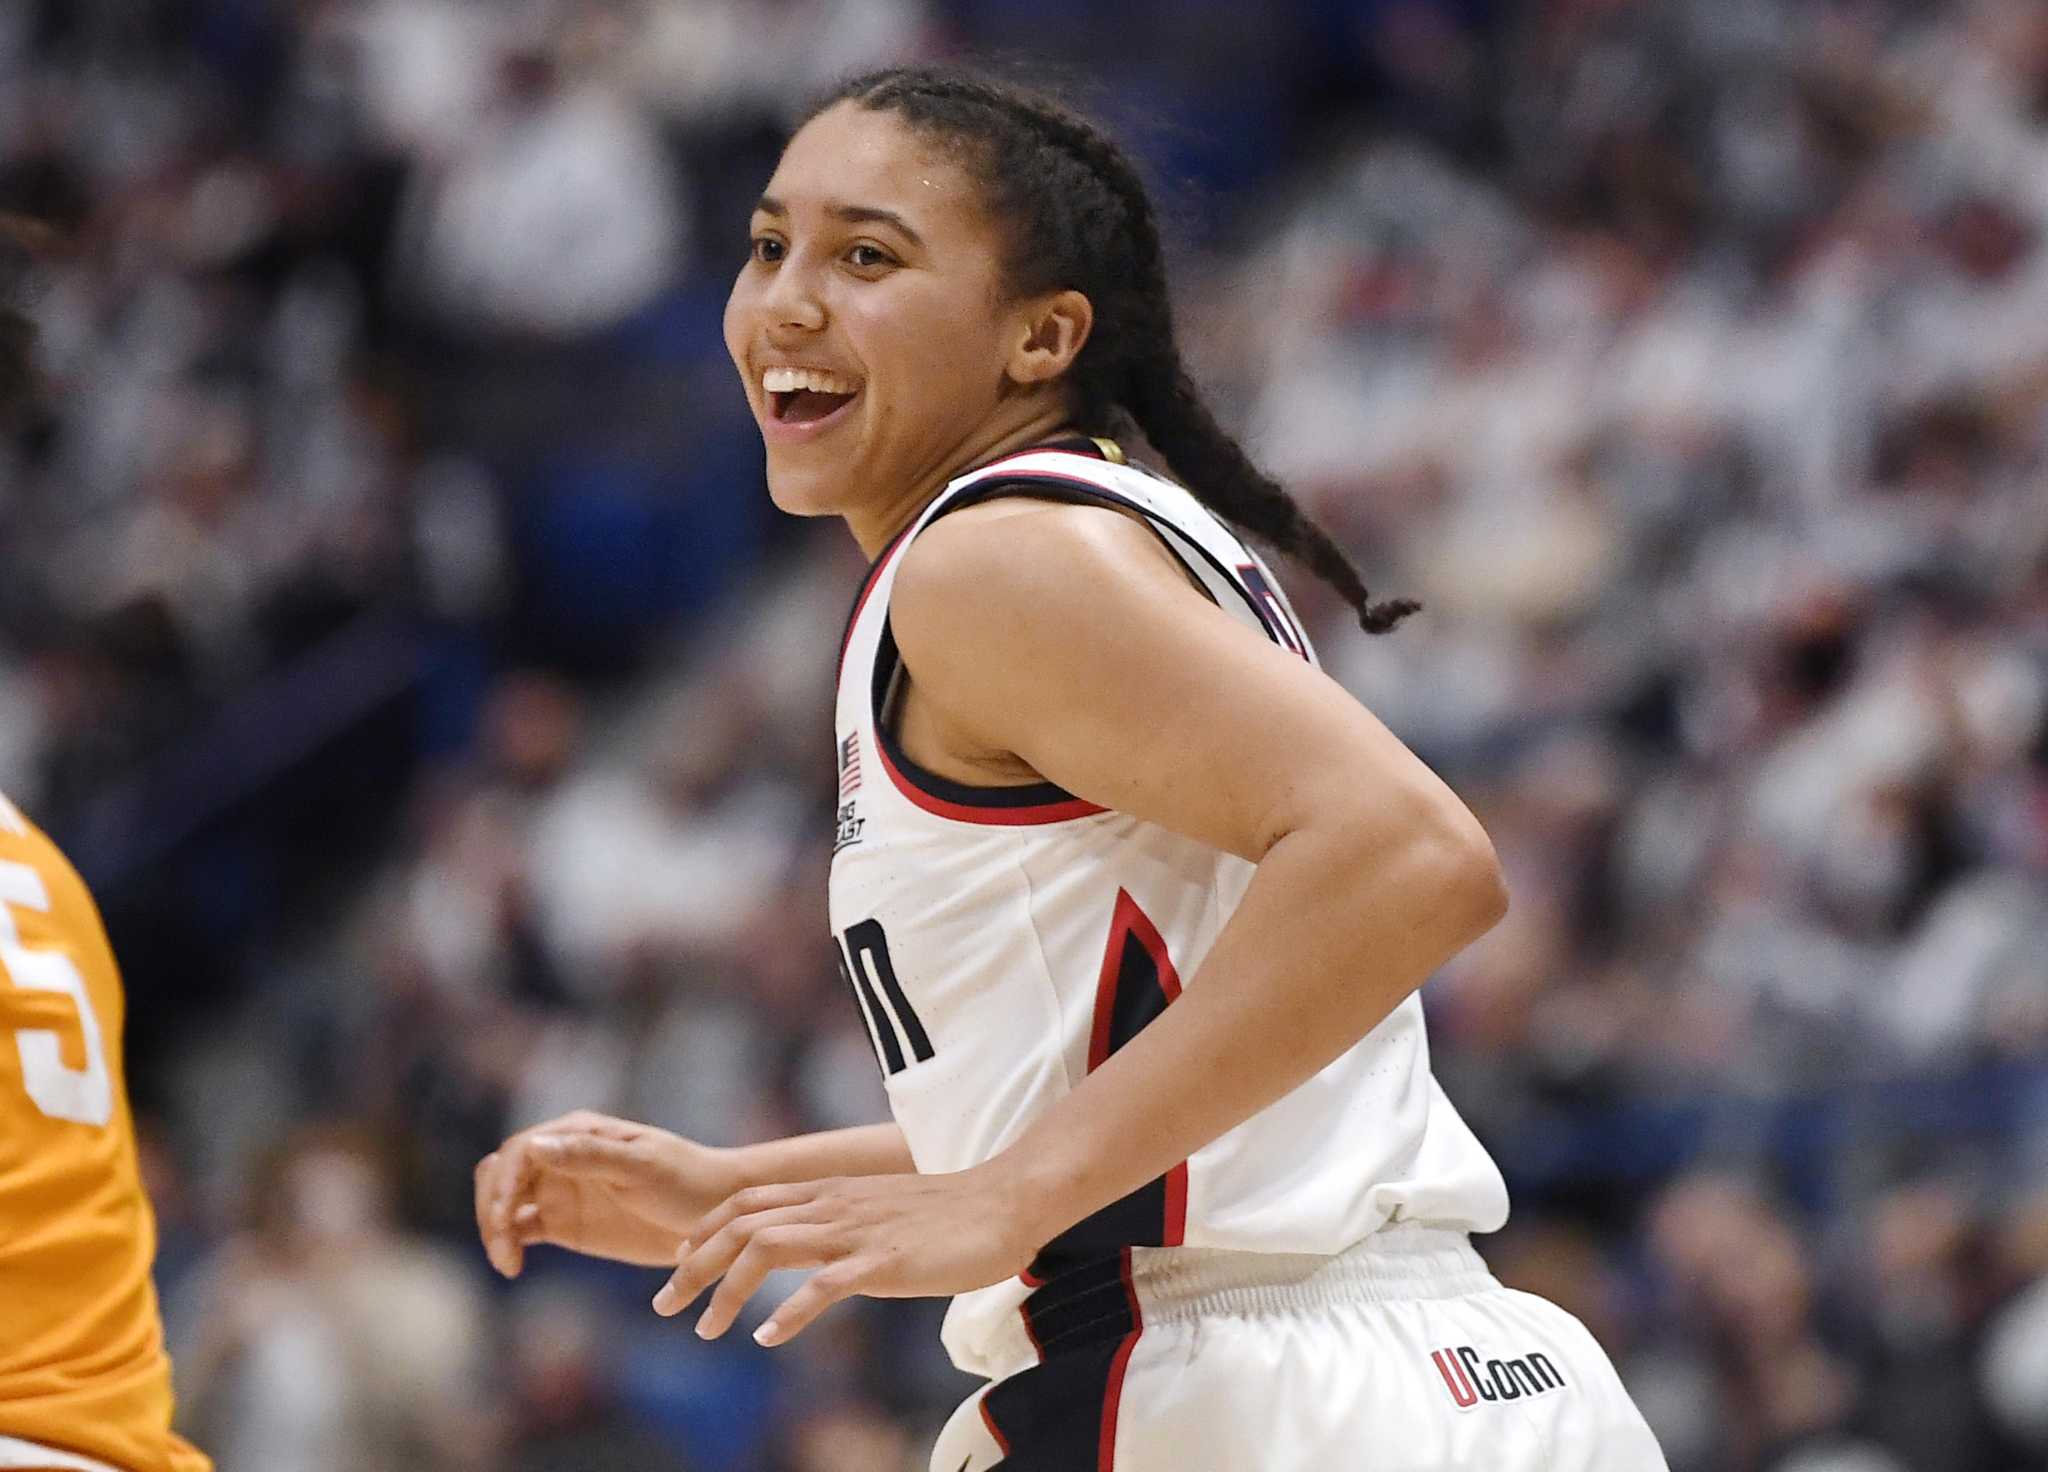 UConn Women's Basketball Star Azzi Fudd Signs NIL Contract with